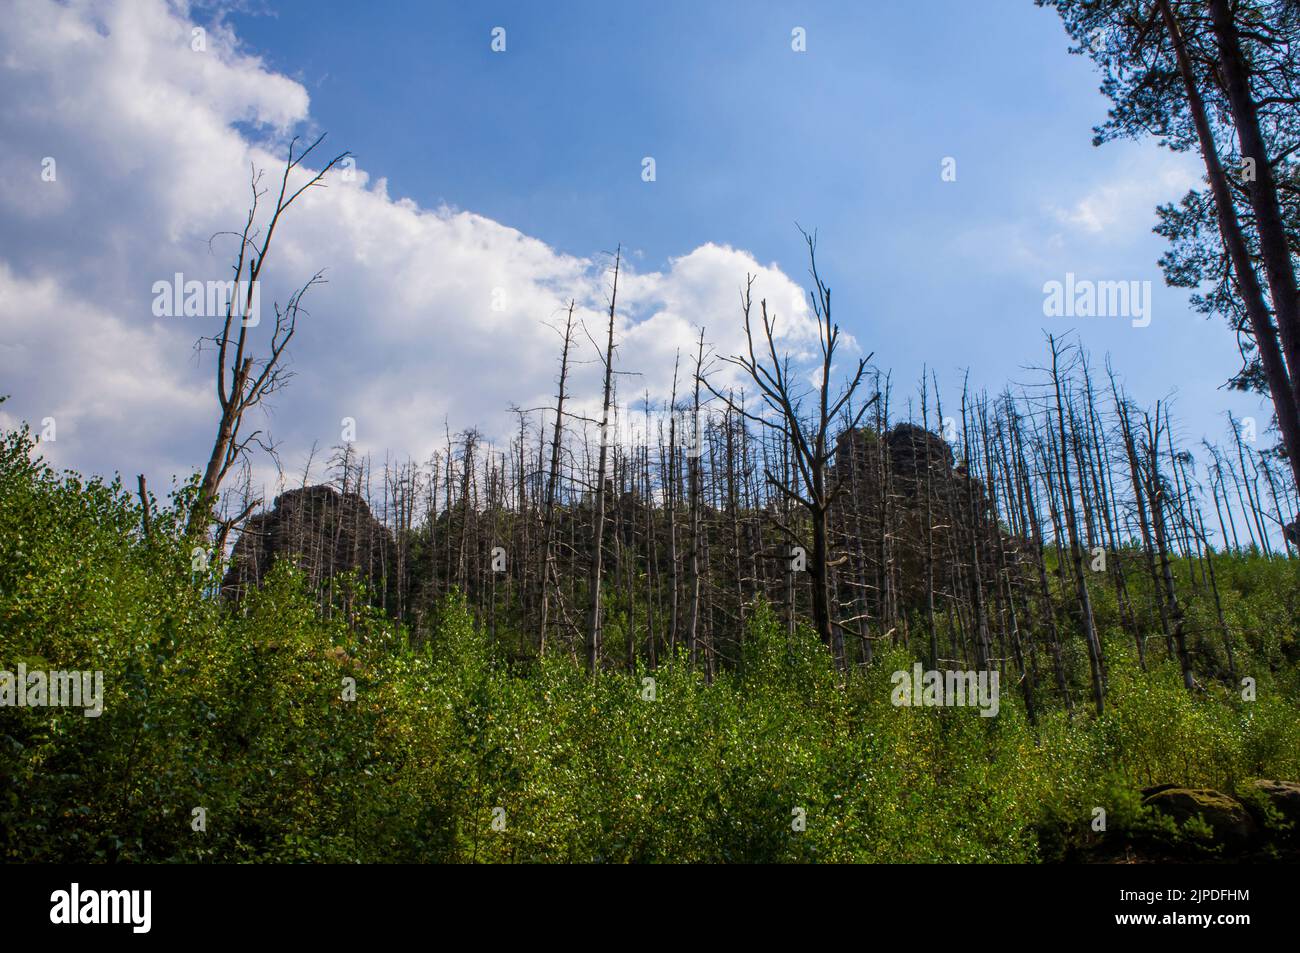 ***2013 FILE PHOTO***  In 2006, on 22 July, a week-long forest fire occurred on Havrani Hill near Jetrichovice in the Bohemian Switzerland National Pa Stock Photo